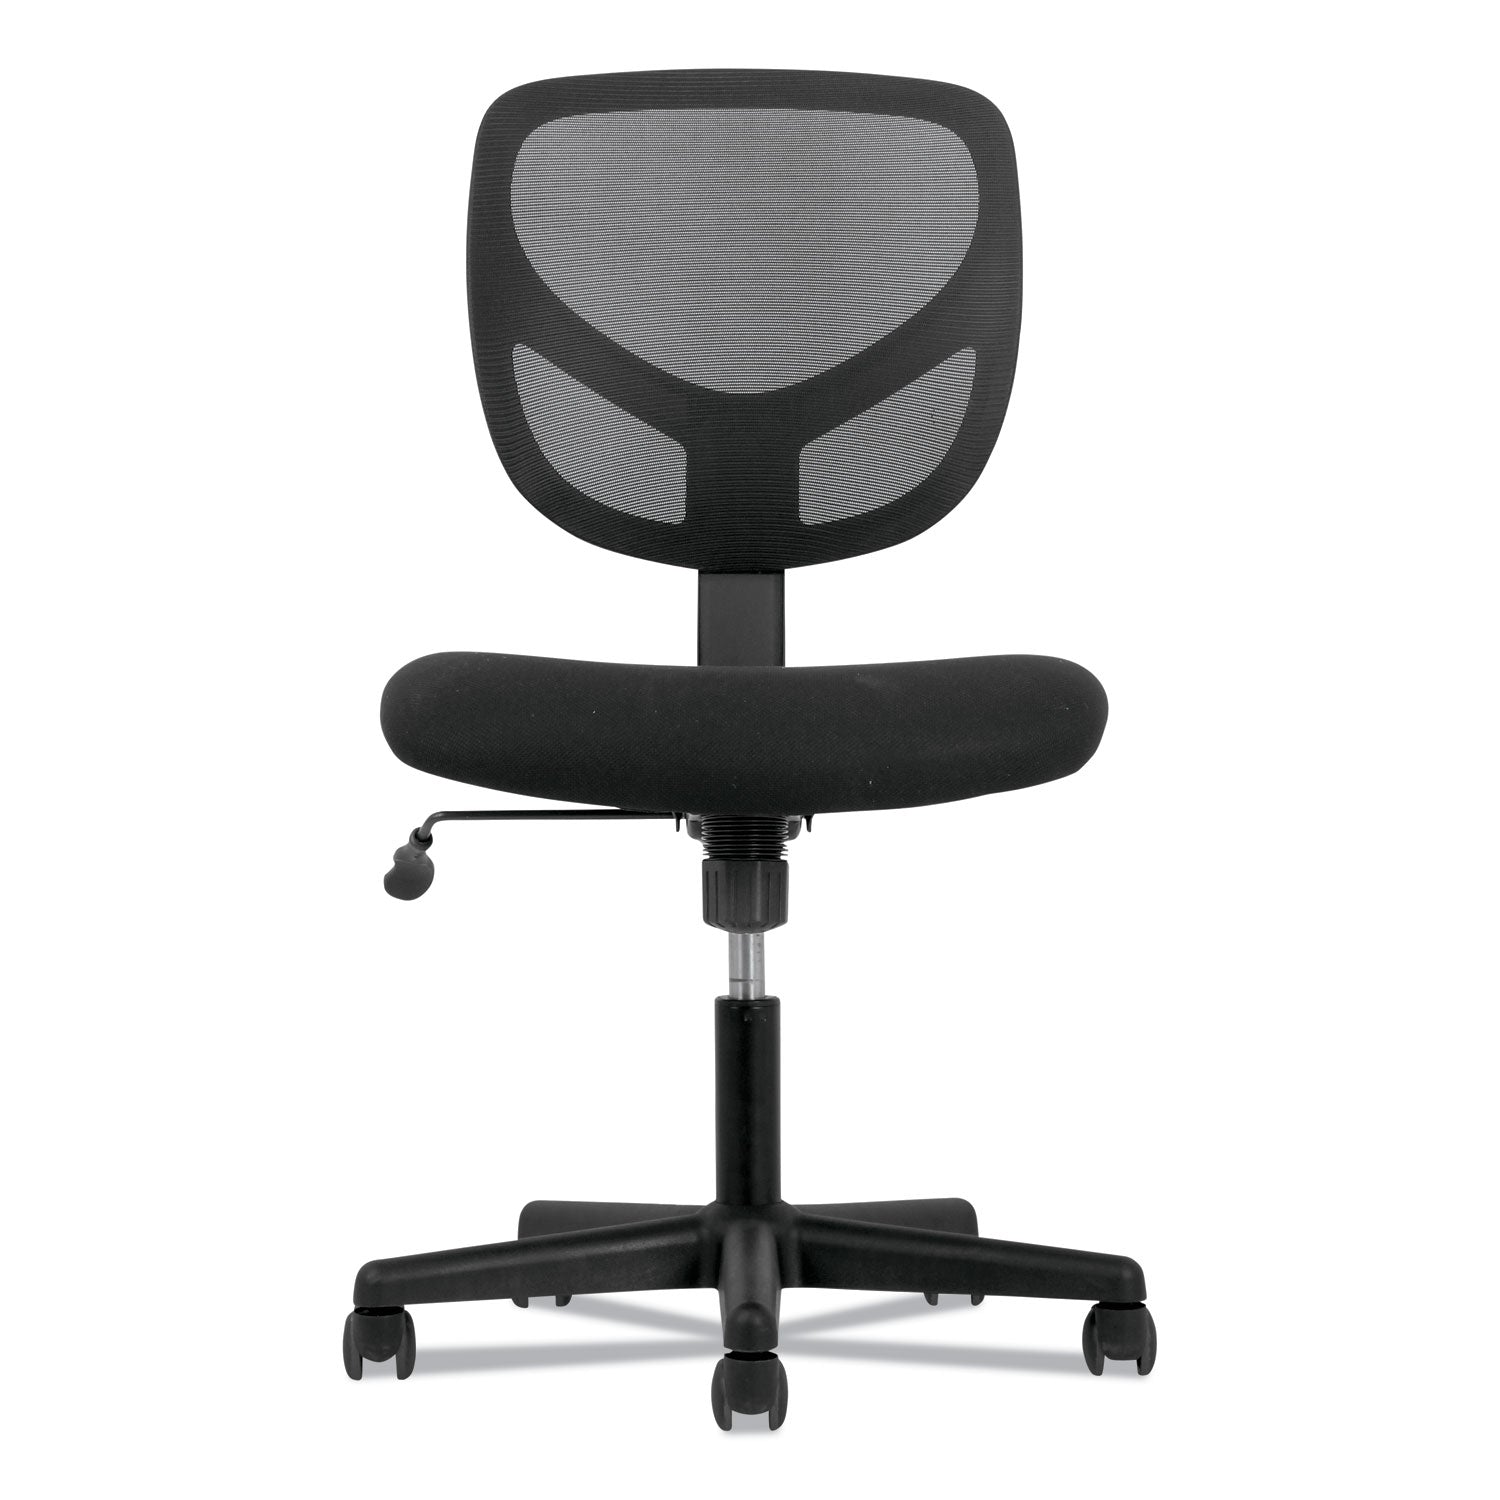 1-oh-one-mid-back-task-chairs-supports-up-to-250-lb-17-to-22-seat-height-black_bsxvst101 - 2